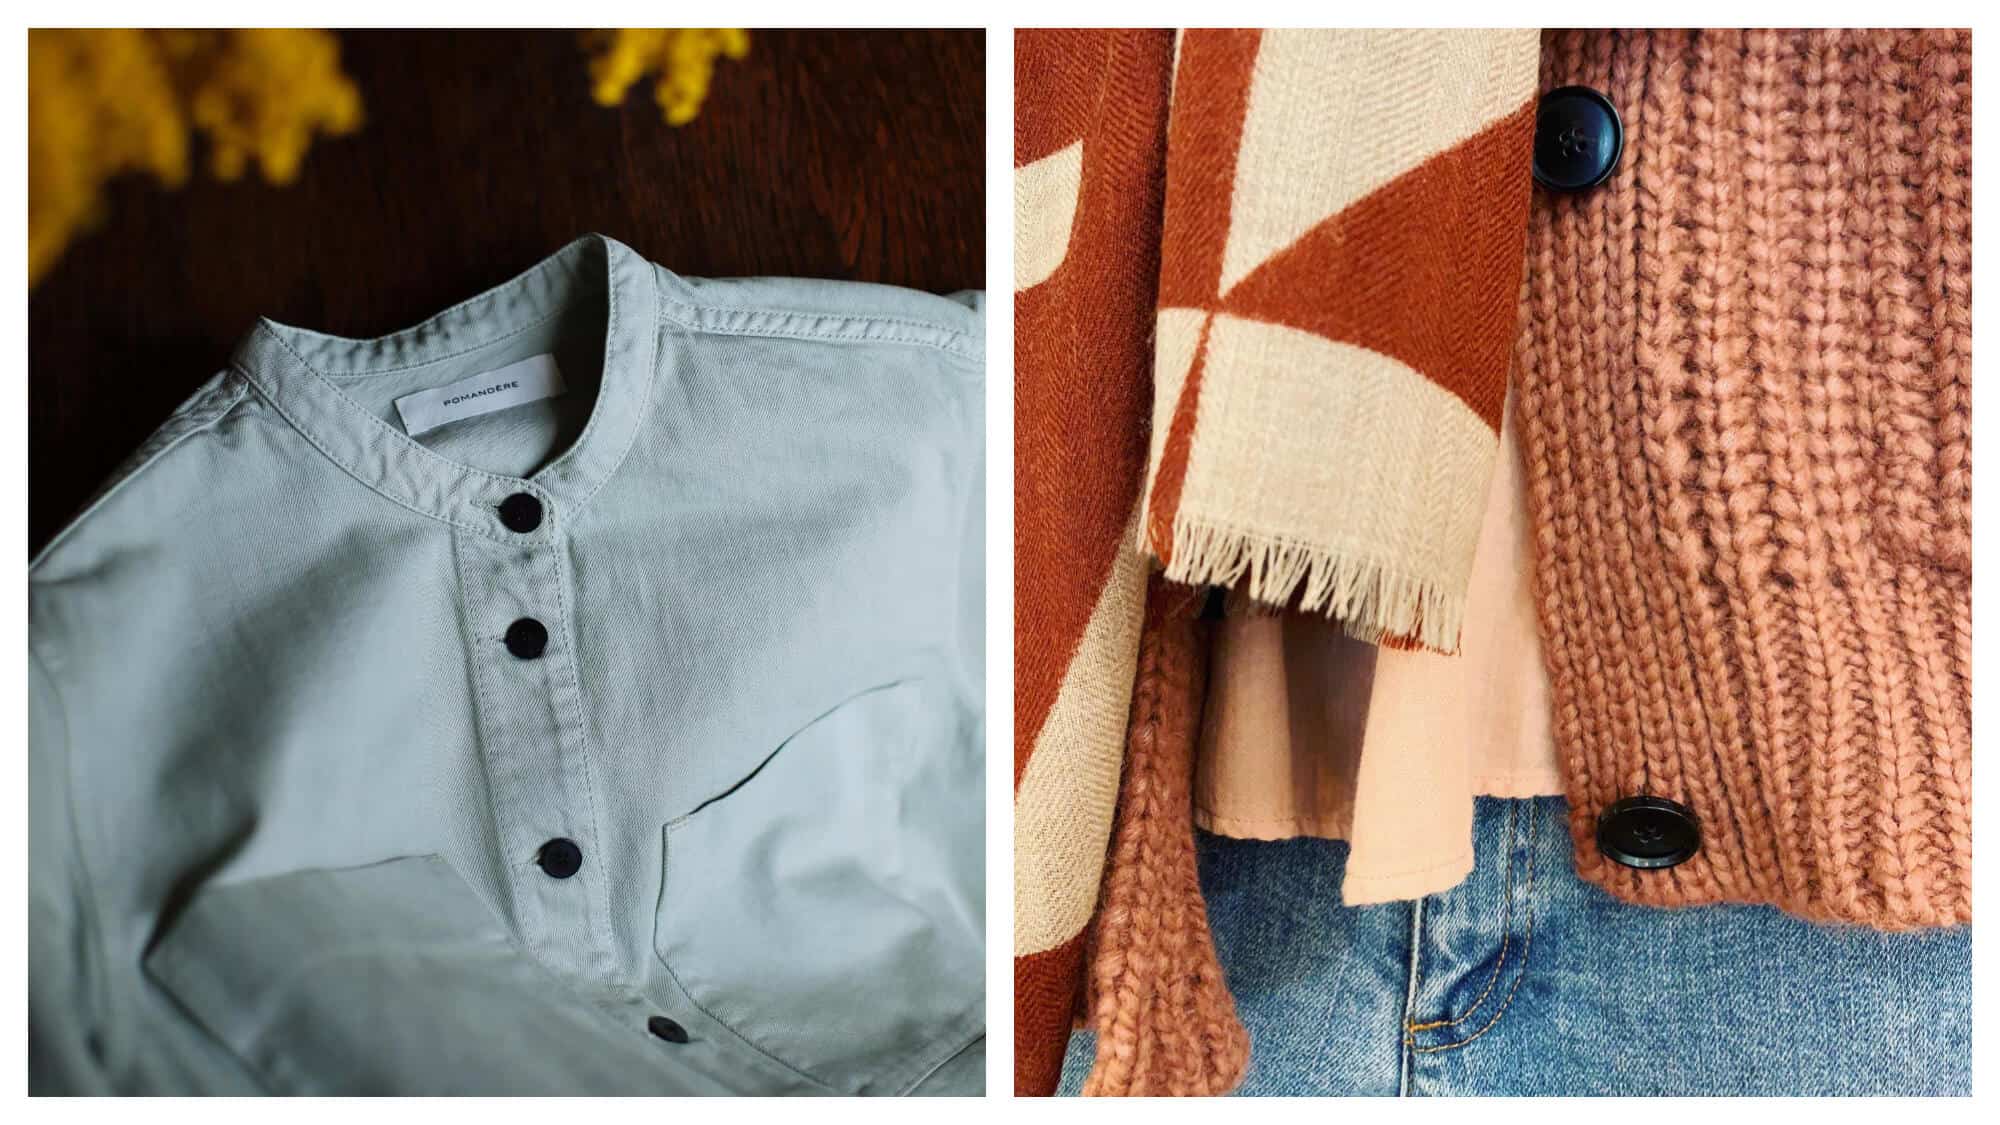 Left: a pale blue/green button-up shirt on a wood table. The buttons are black and the shirt doesn't have a colour. The label of the shirt is Pomandere. Right: a close up of a woman's outfit, she's wearing an pale orange shirt with an orange/brown knit cardigan, a cream and burnt orange scarf and jeans. 